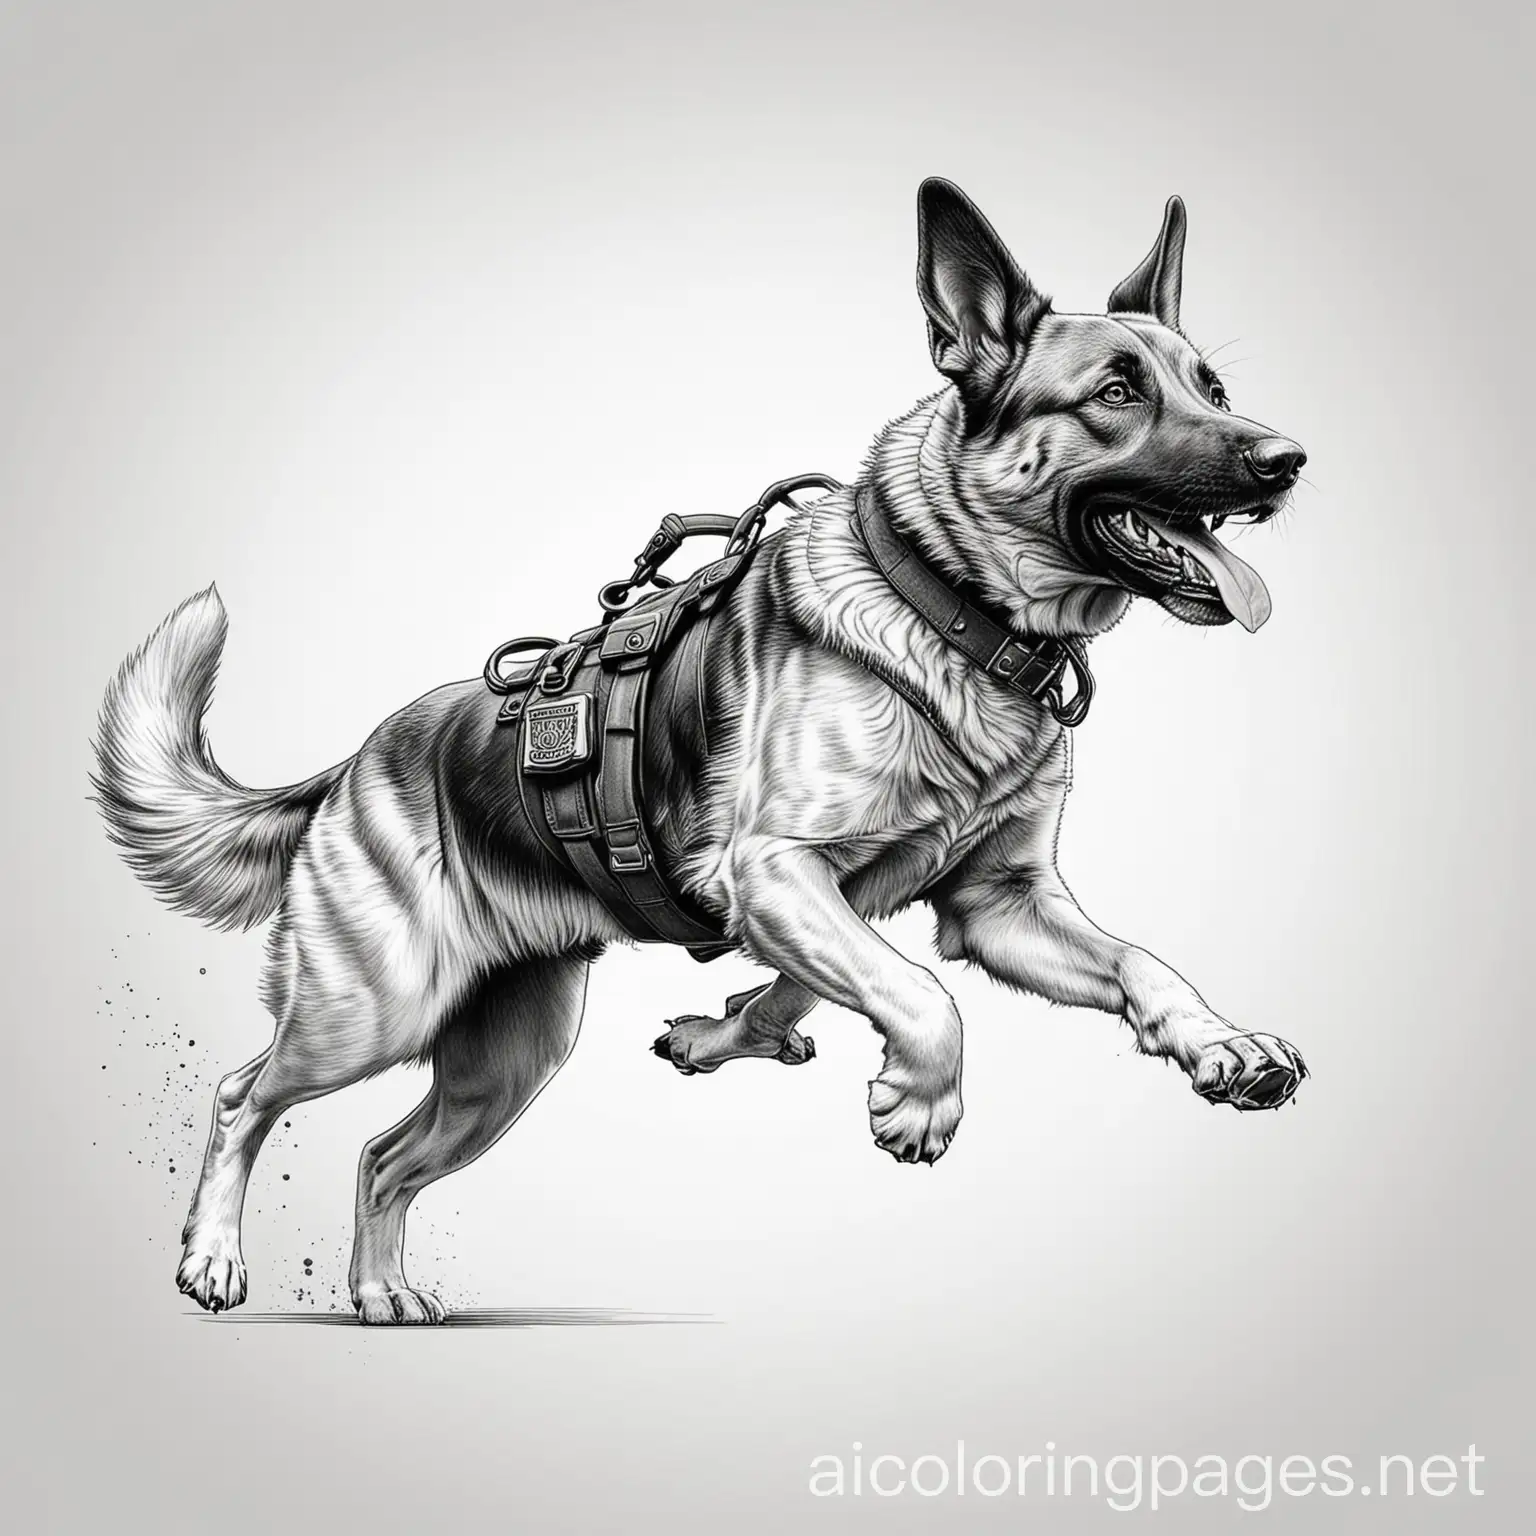 Police dog chasing 

, Coloring Page, black and white, line art, white background, Simplicity, Ample White Space. The background of the coloring page is plain white to make it easy for young children to color within the lines. The outlines of all the subjects are easy to distinguish, making it simple for kids to color without too much difficulty